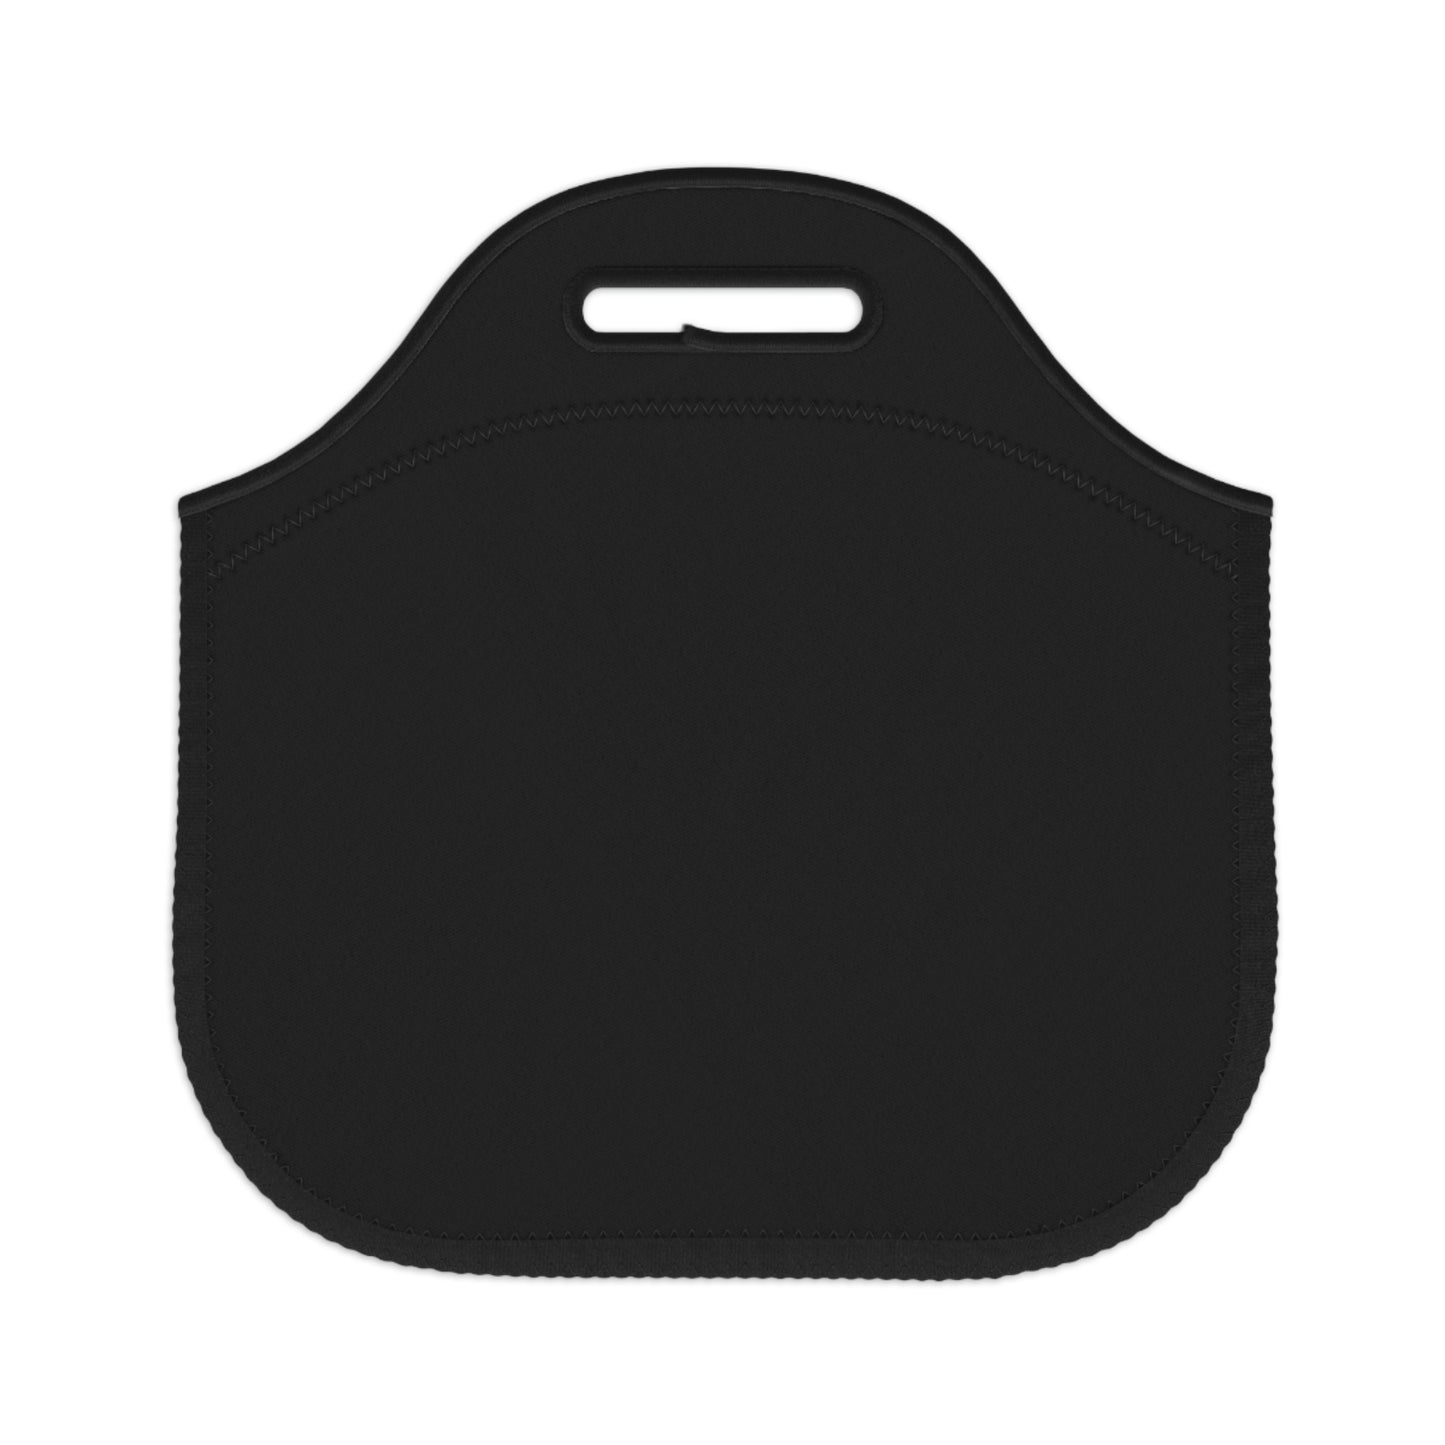 The Bible as Simple as ABC K Neoprene Lunch Bag